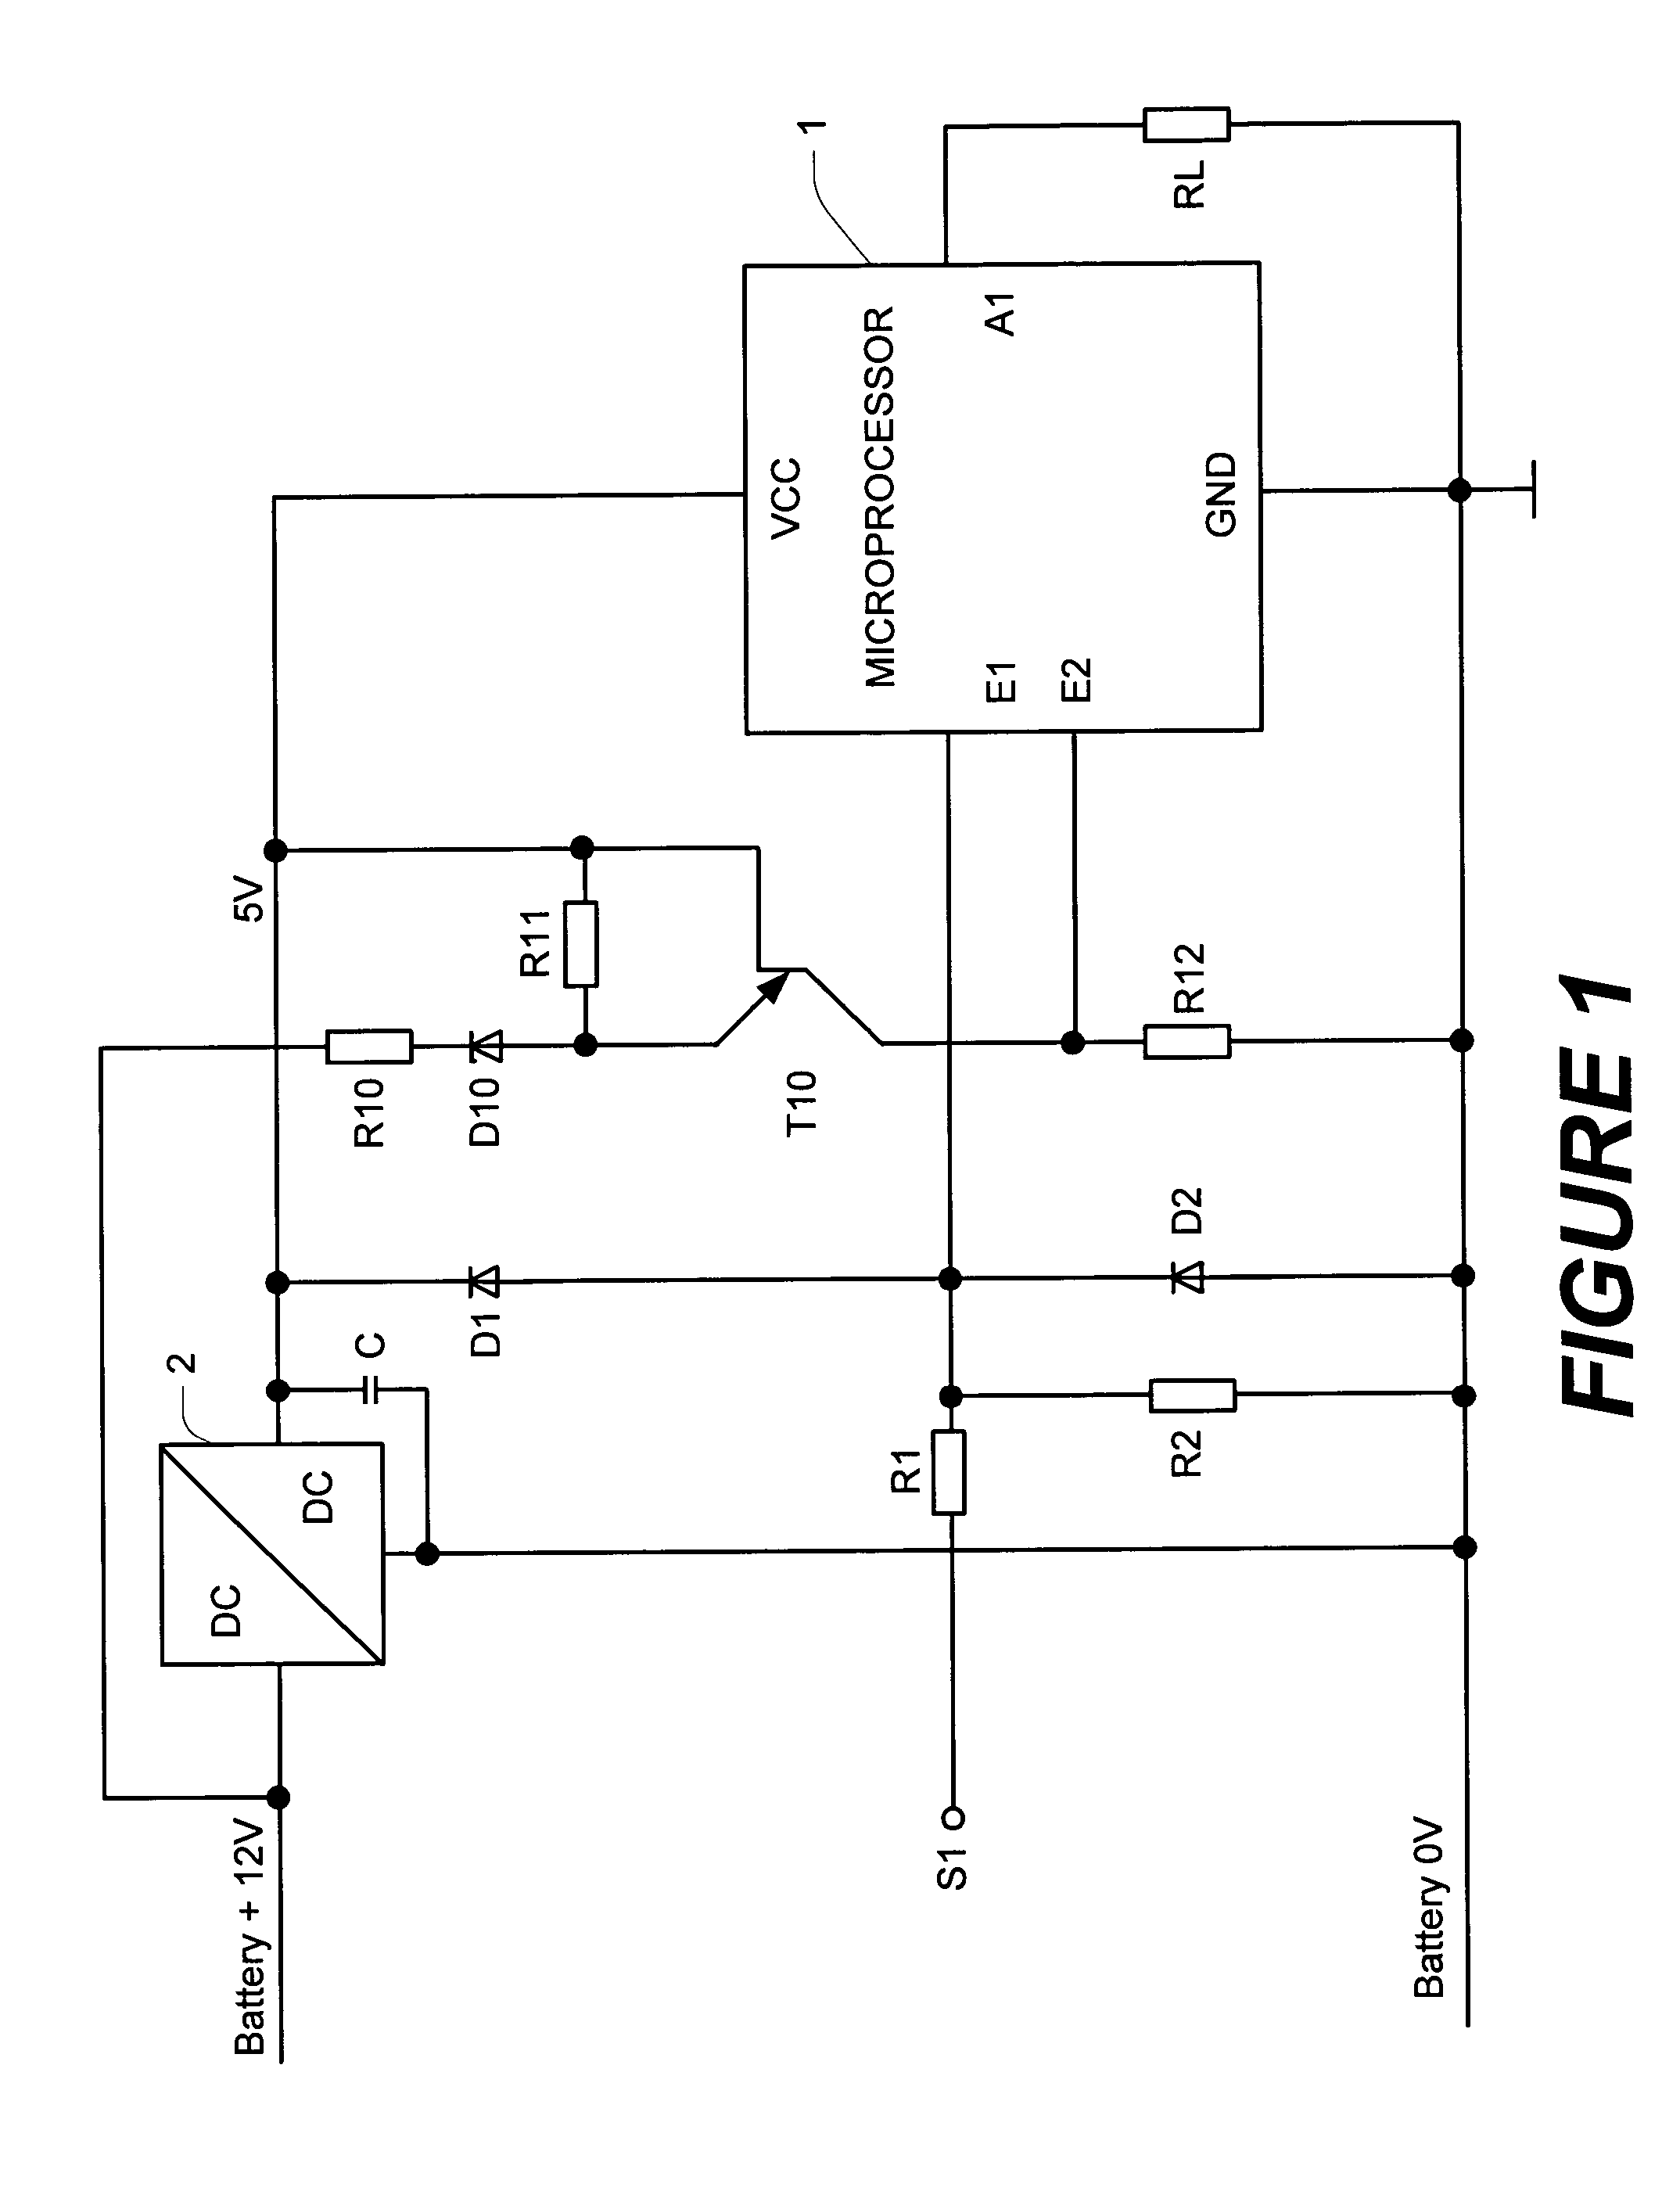 Protective circuit and method for operating said protective circuit, in particular for overvoltage protection for an electronic control system for a motor vehicle